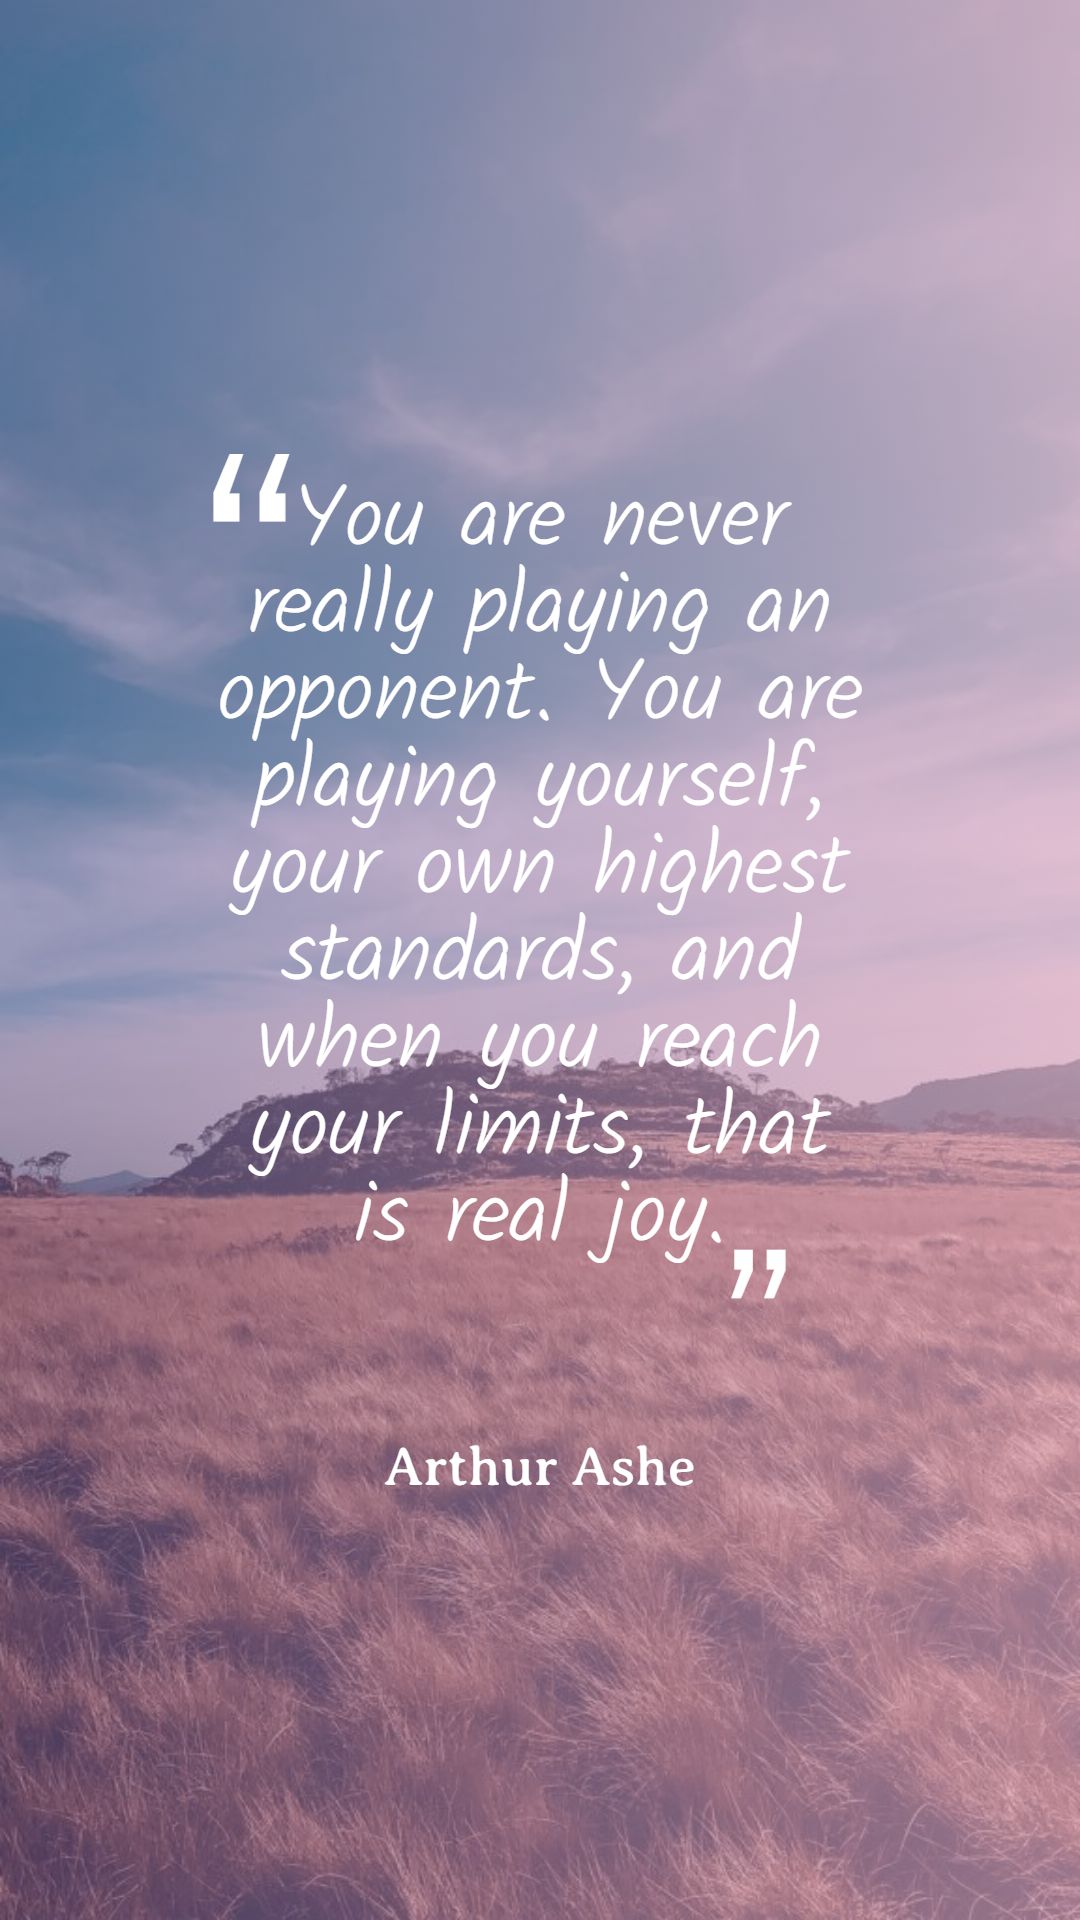 You are never really playing an opponent. You are playing yourself your own highest standards and when you reach your limits that is real joy.